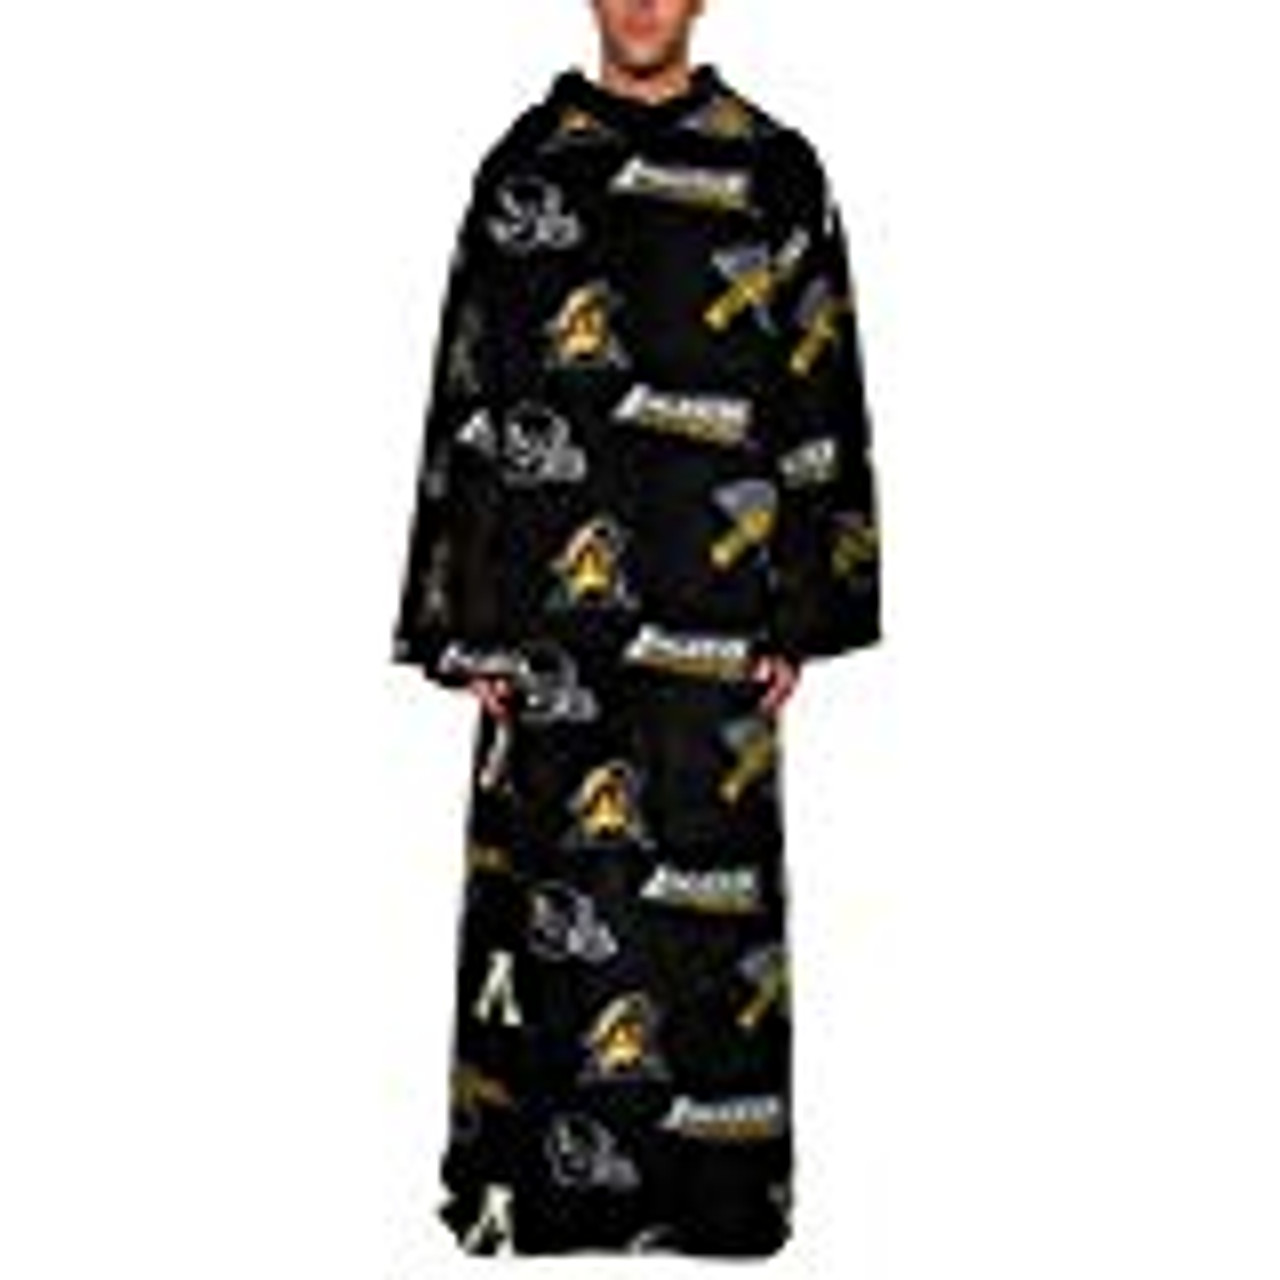 Appalachian State Snuggie-The Blanket with Sleeves